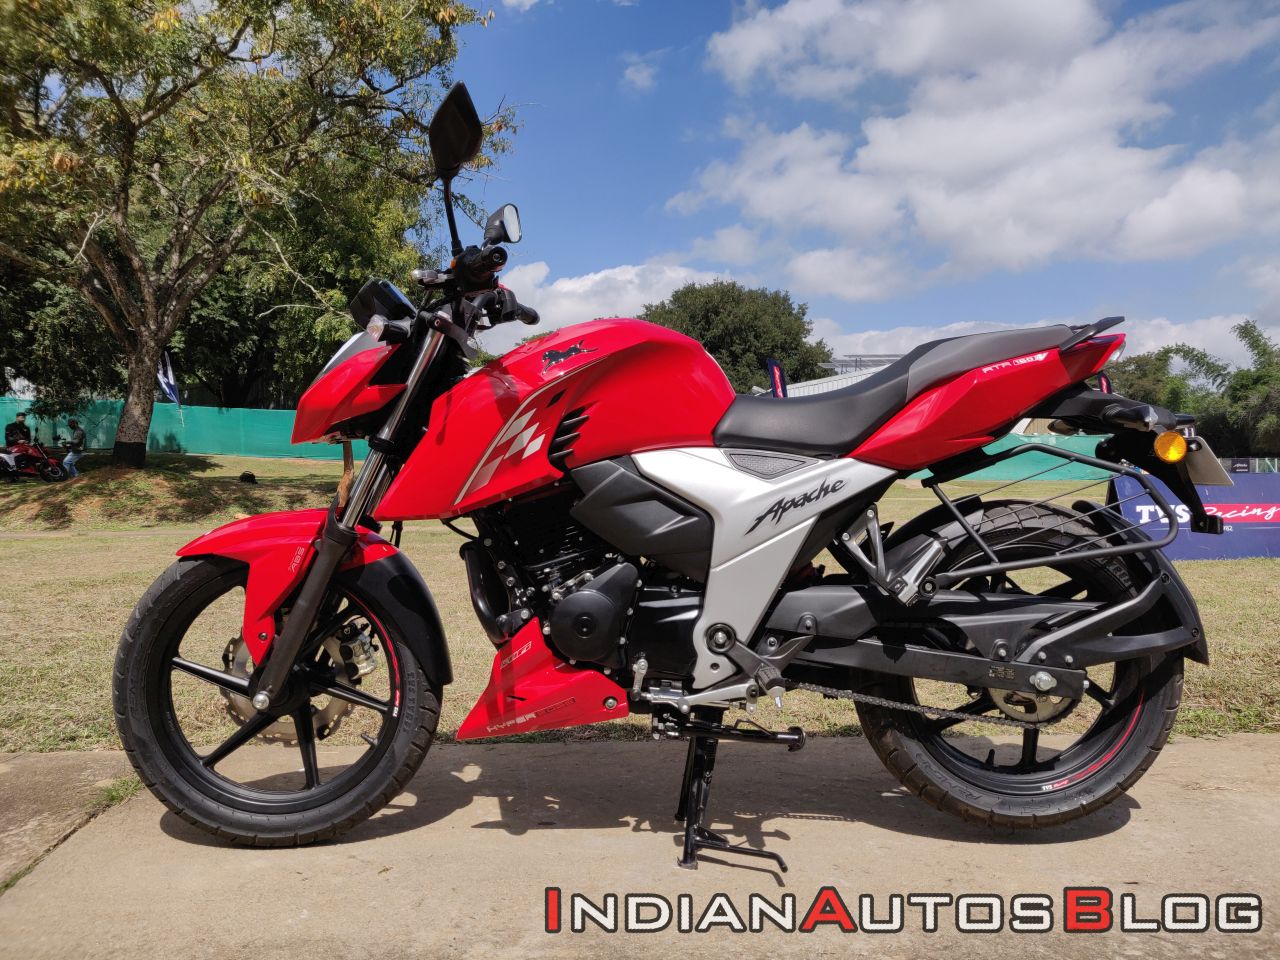 Bs Vi Tvs Apache Rtr 160 4v Bs Vi Tvs Apache Rtr 200 4v Prices Hiked By Inr 1 000